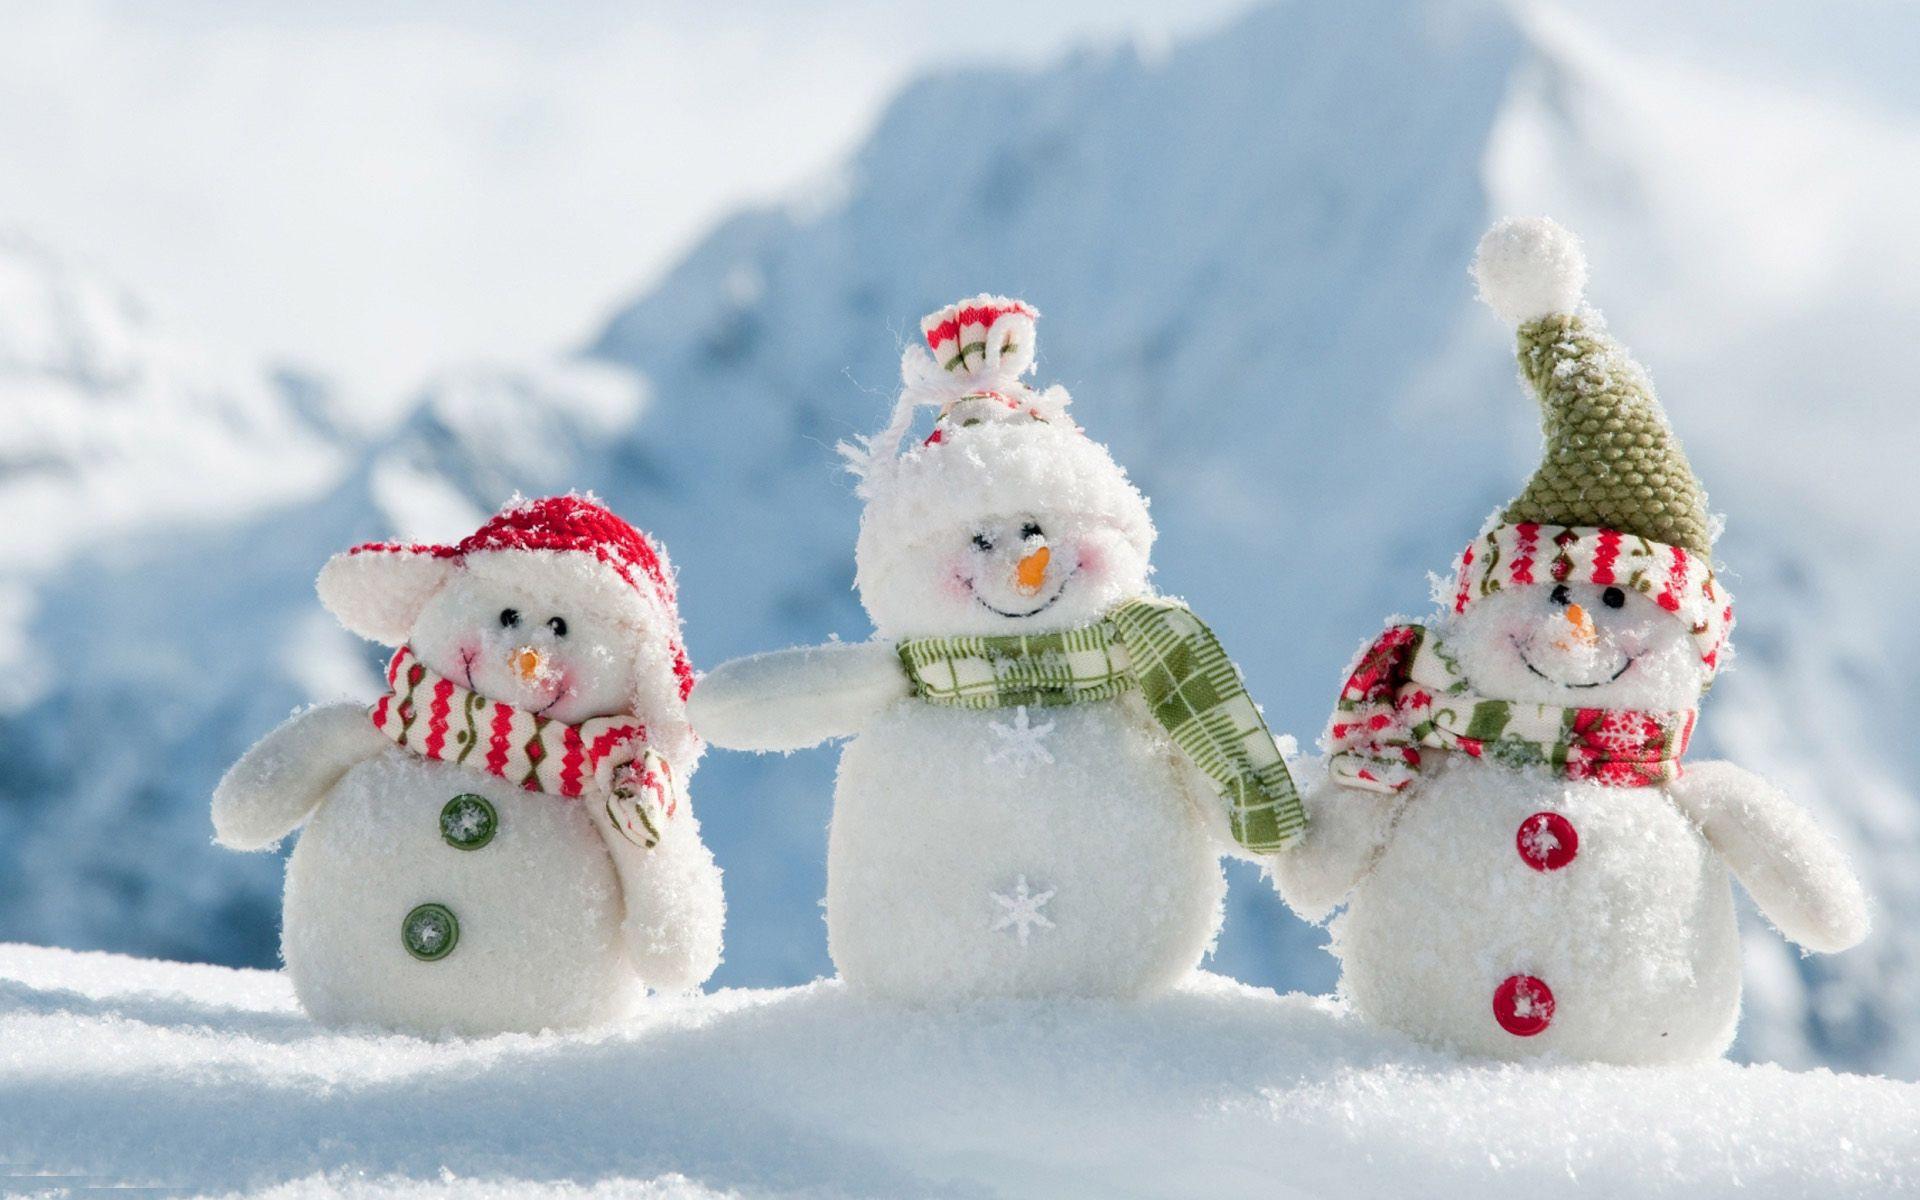 Cute Snowman Ideas. Time for the Holidays. Time for the Holidays